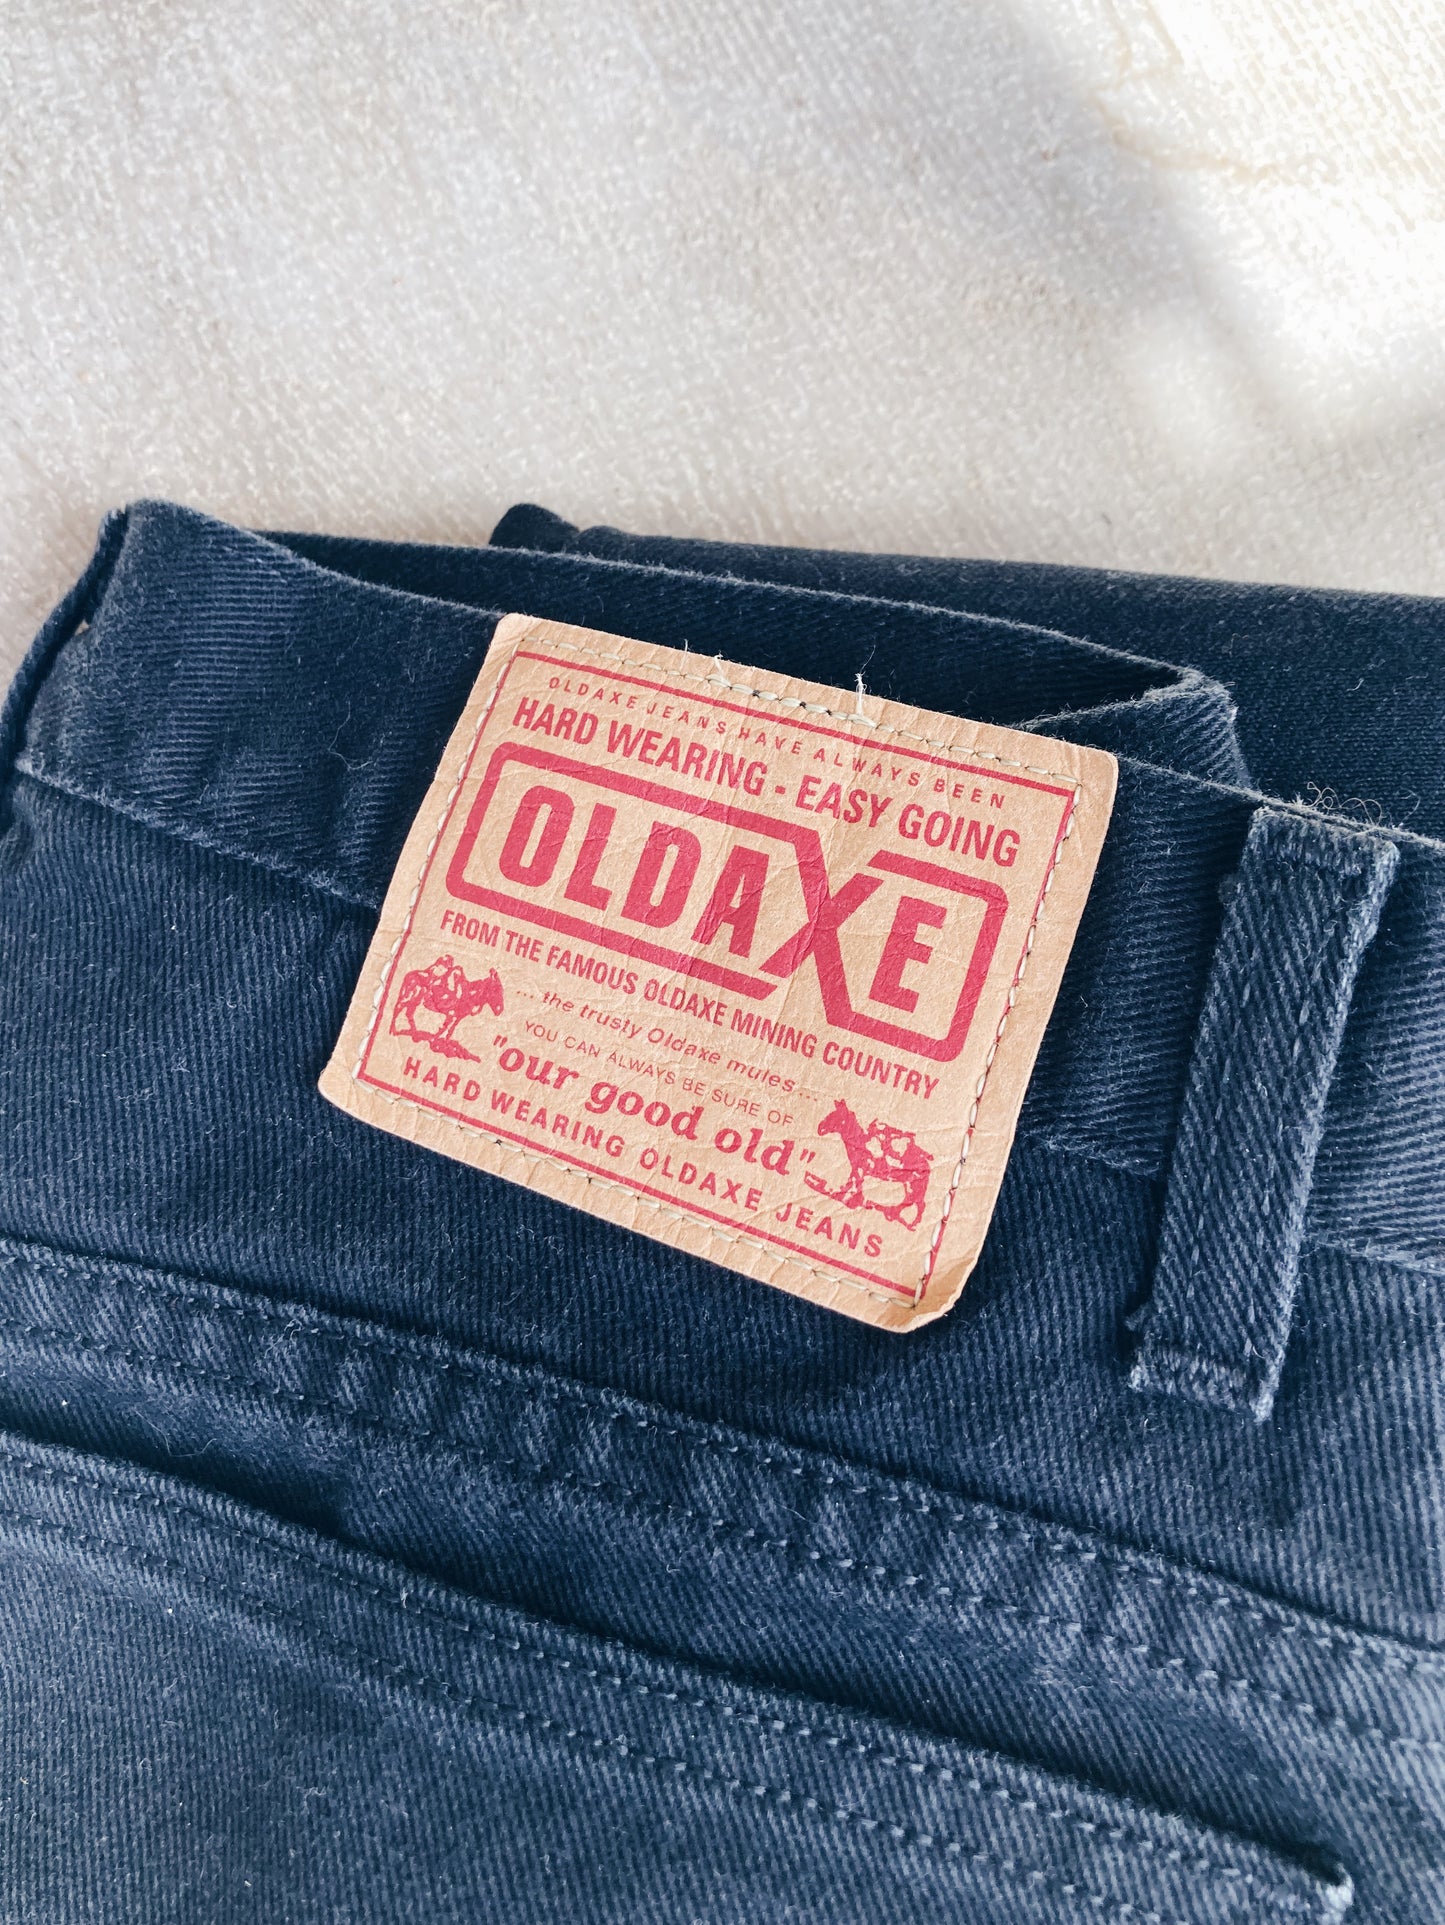 NEW IN! Oldaxe jeans